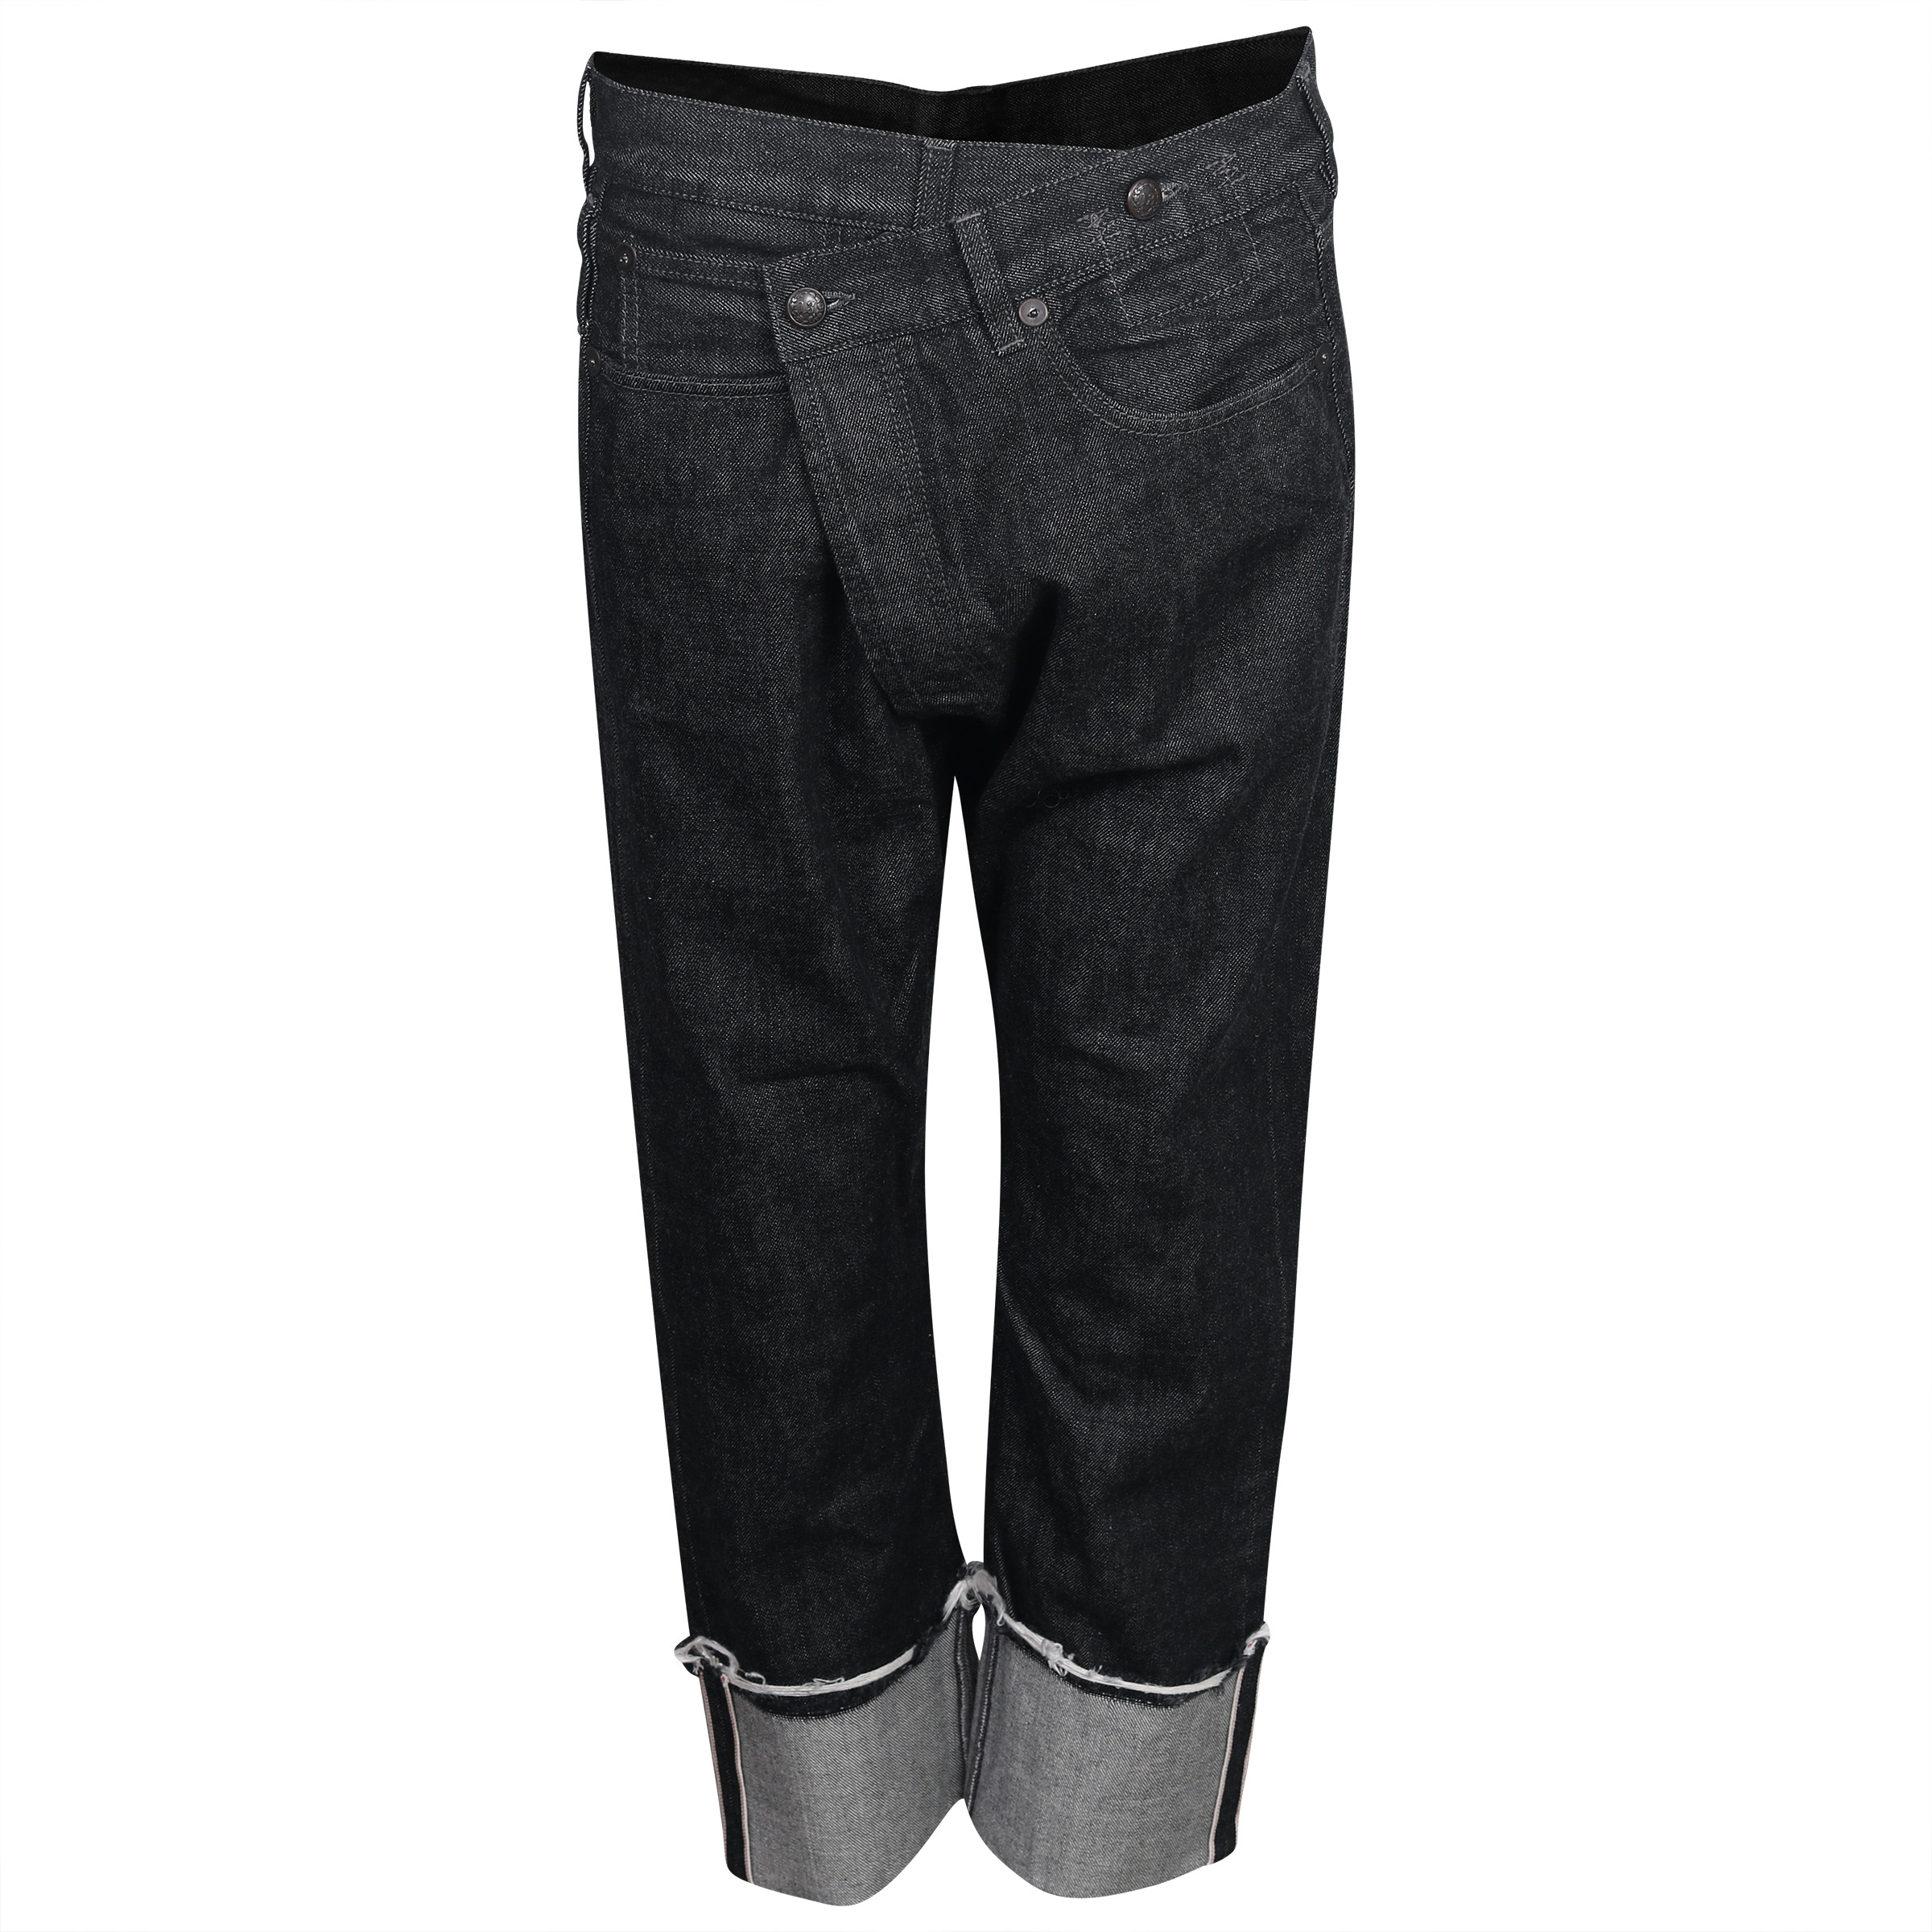 R13 Cross Over Jeans with Cuff in Black 30